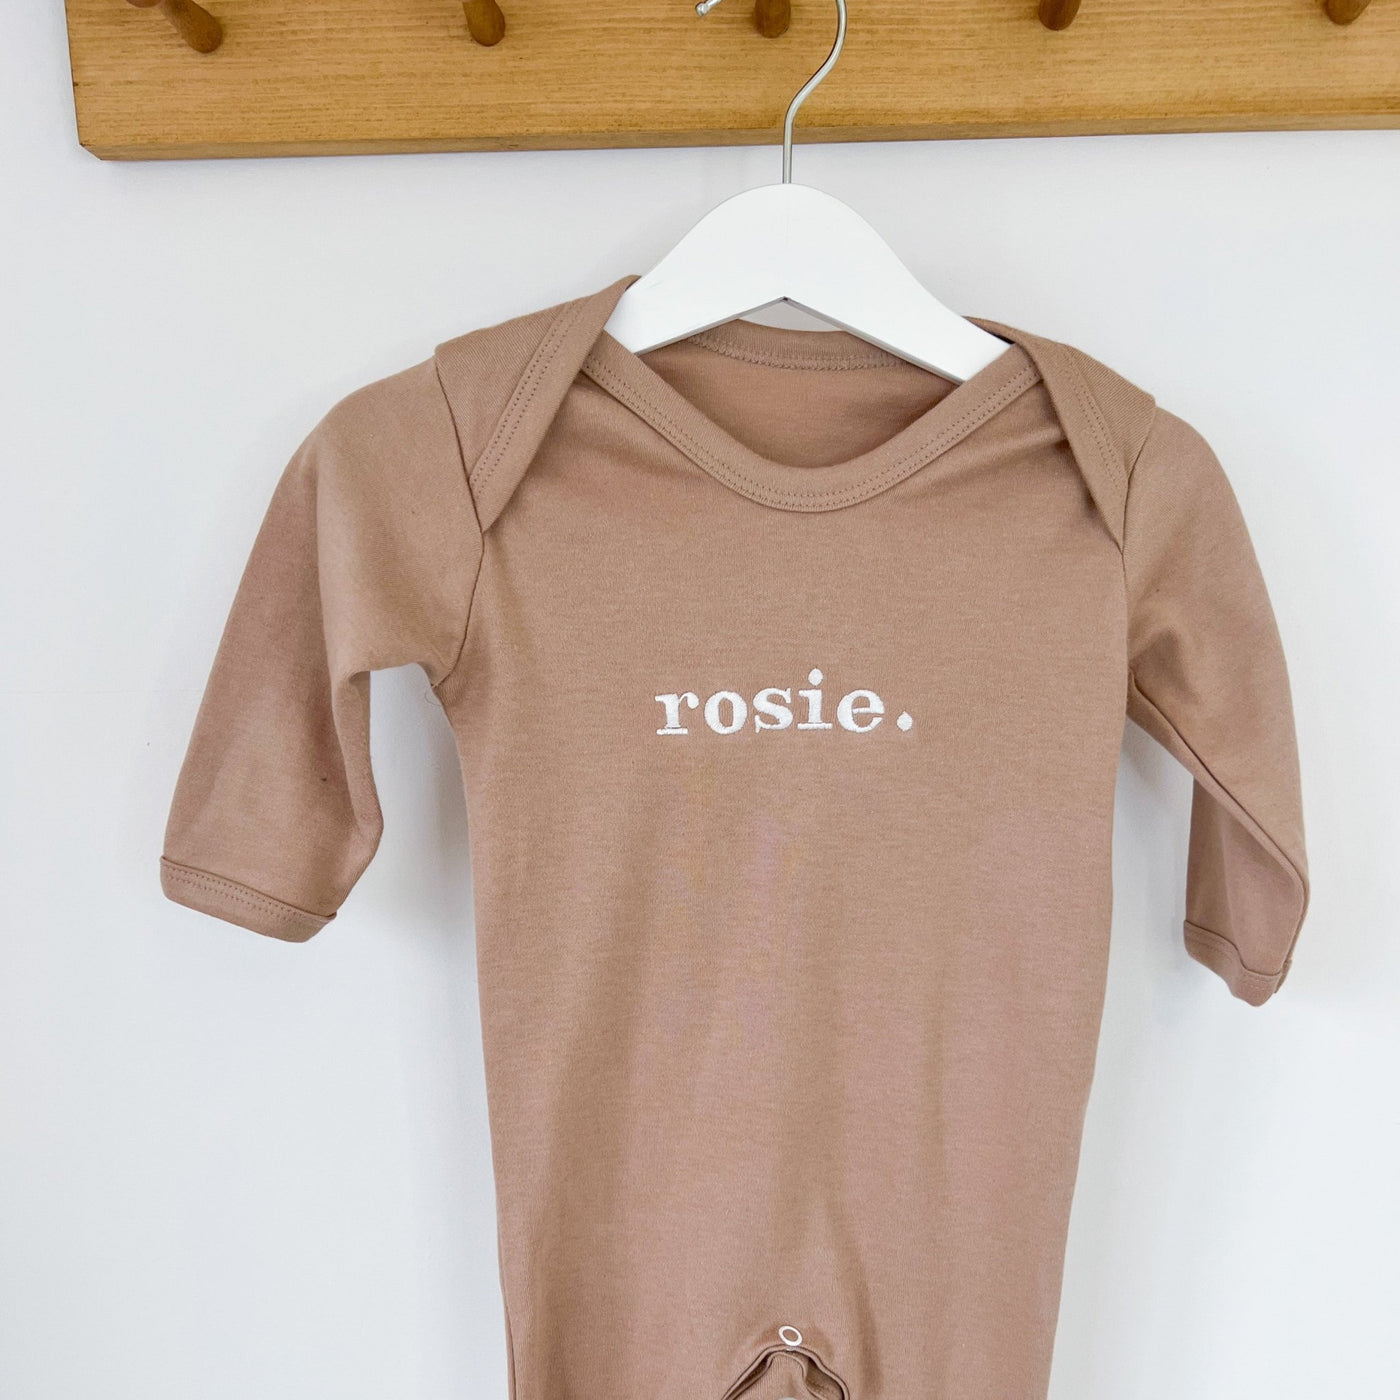 Embroidered Baby Name Rompersuit - Amber and Noah